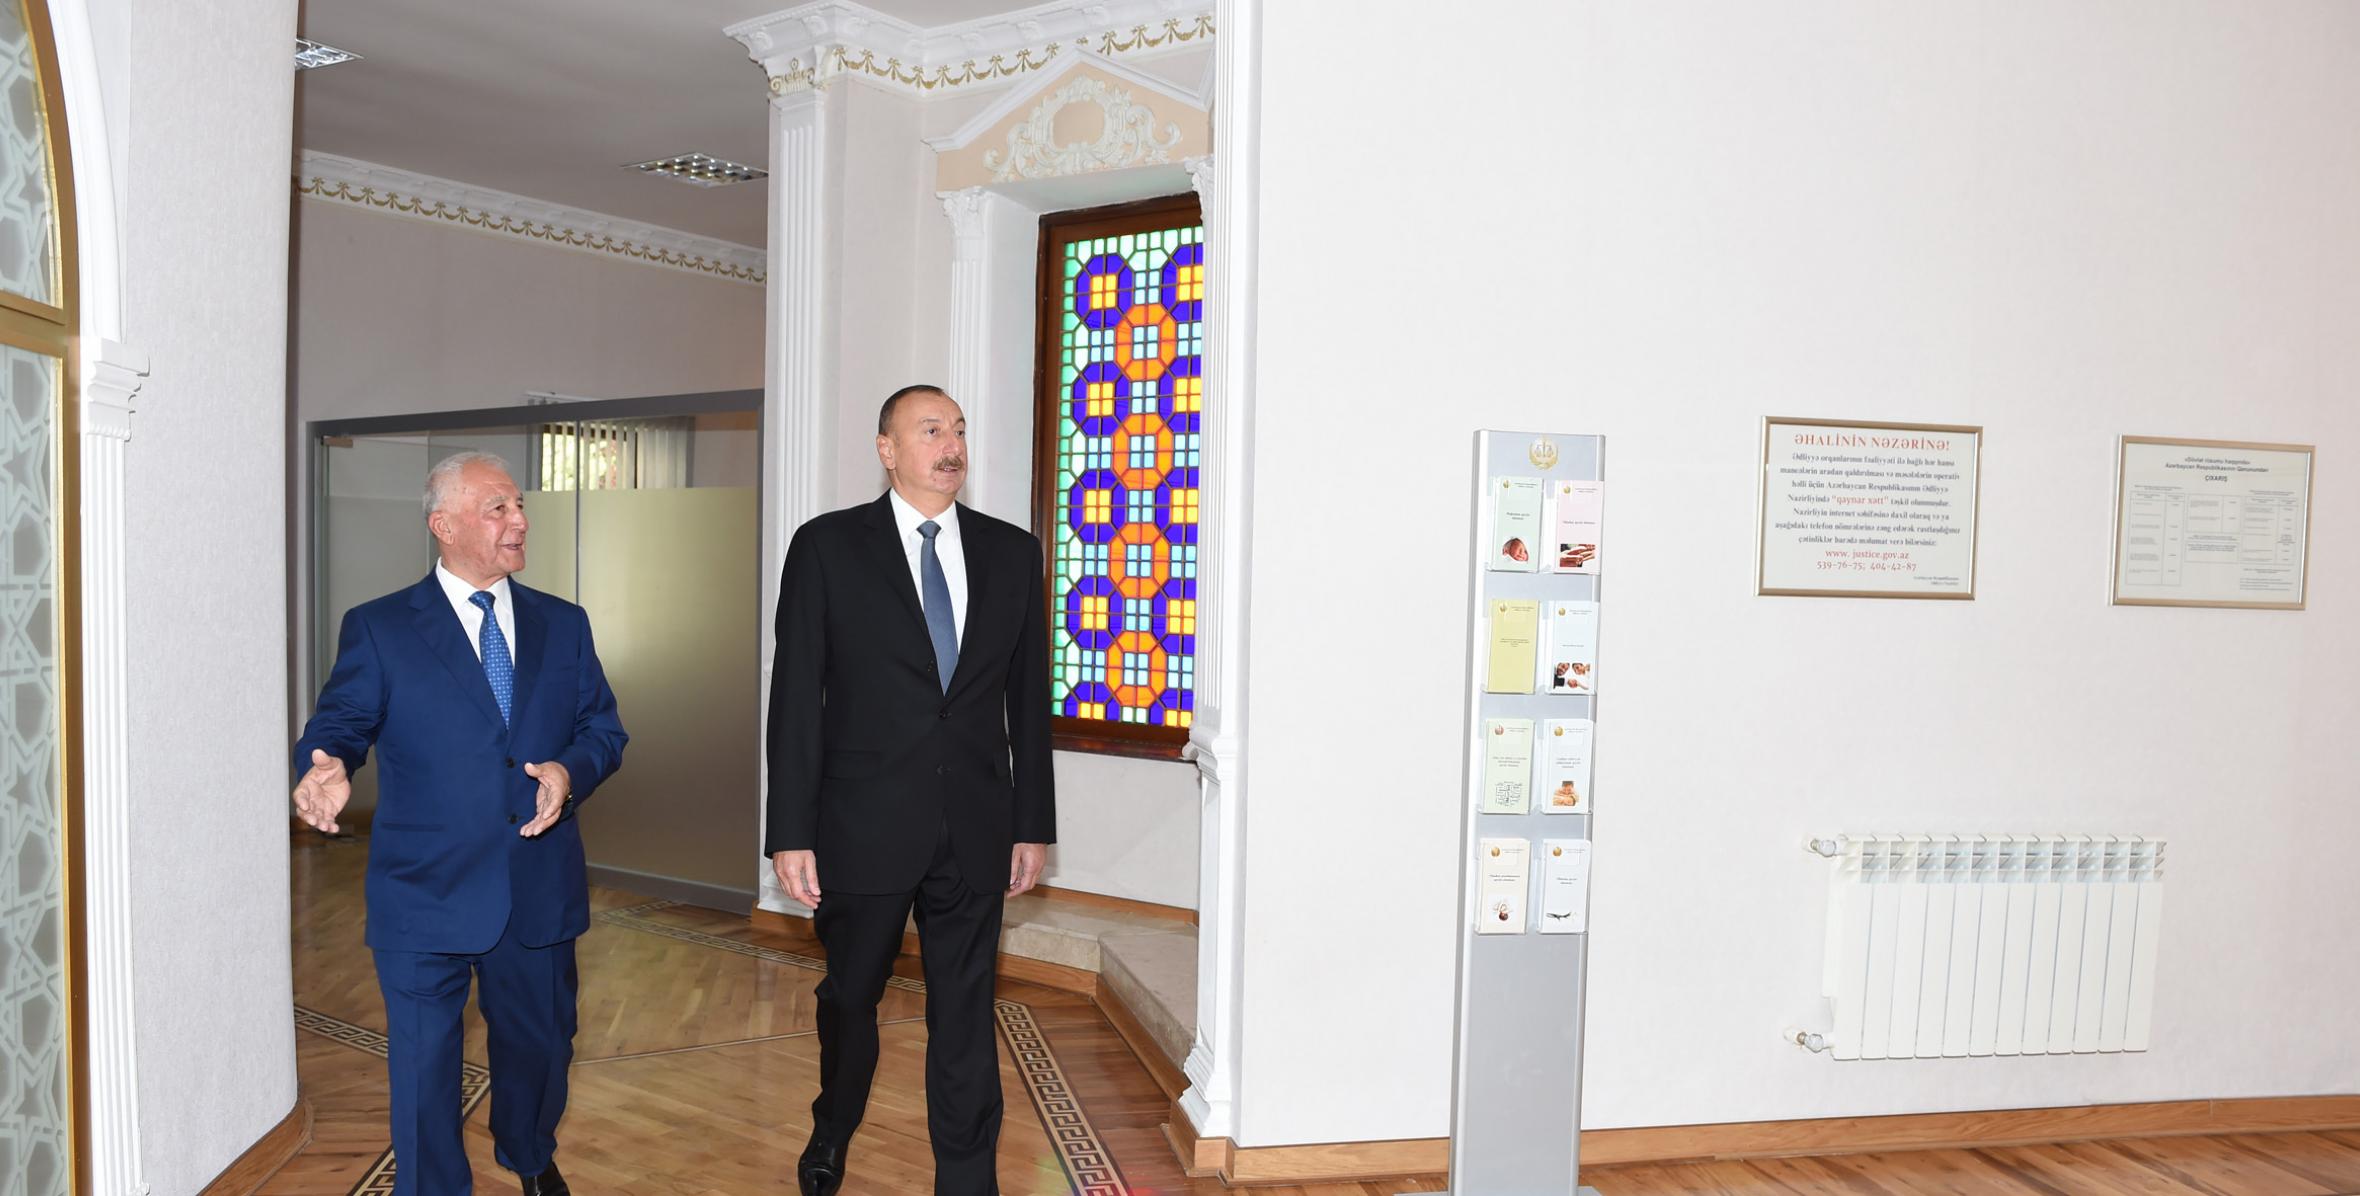 Ilham Aliyev has today attended the opening ceremony of a new building of the Marriage Ceremony House as part of his visit to Khachmaz